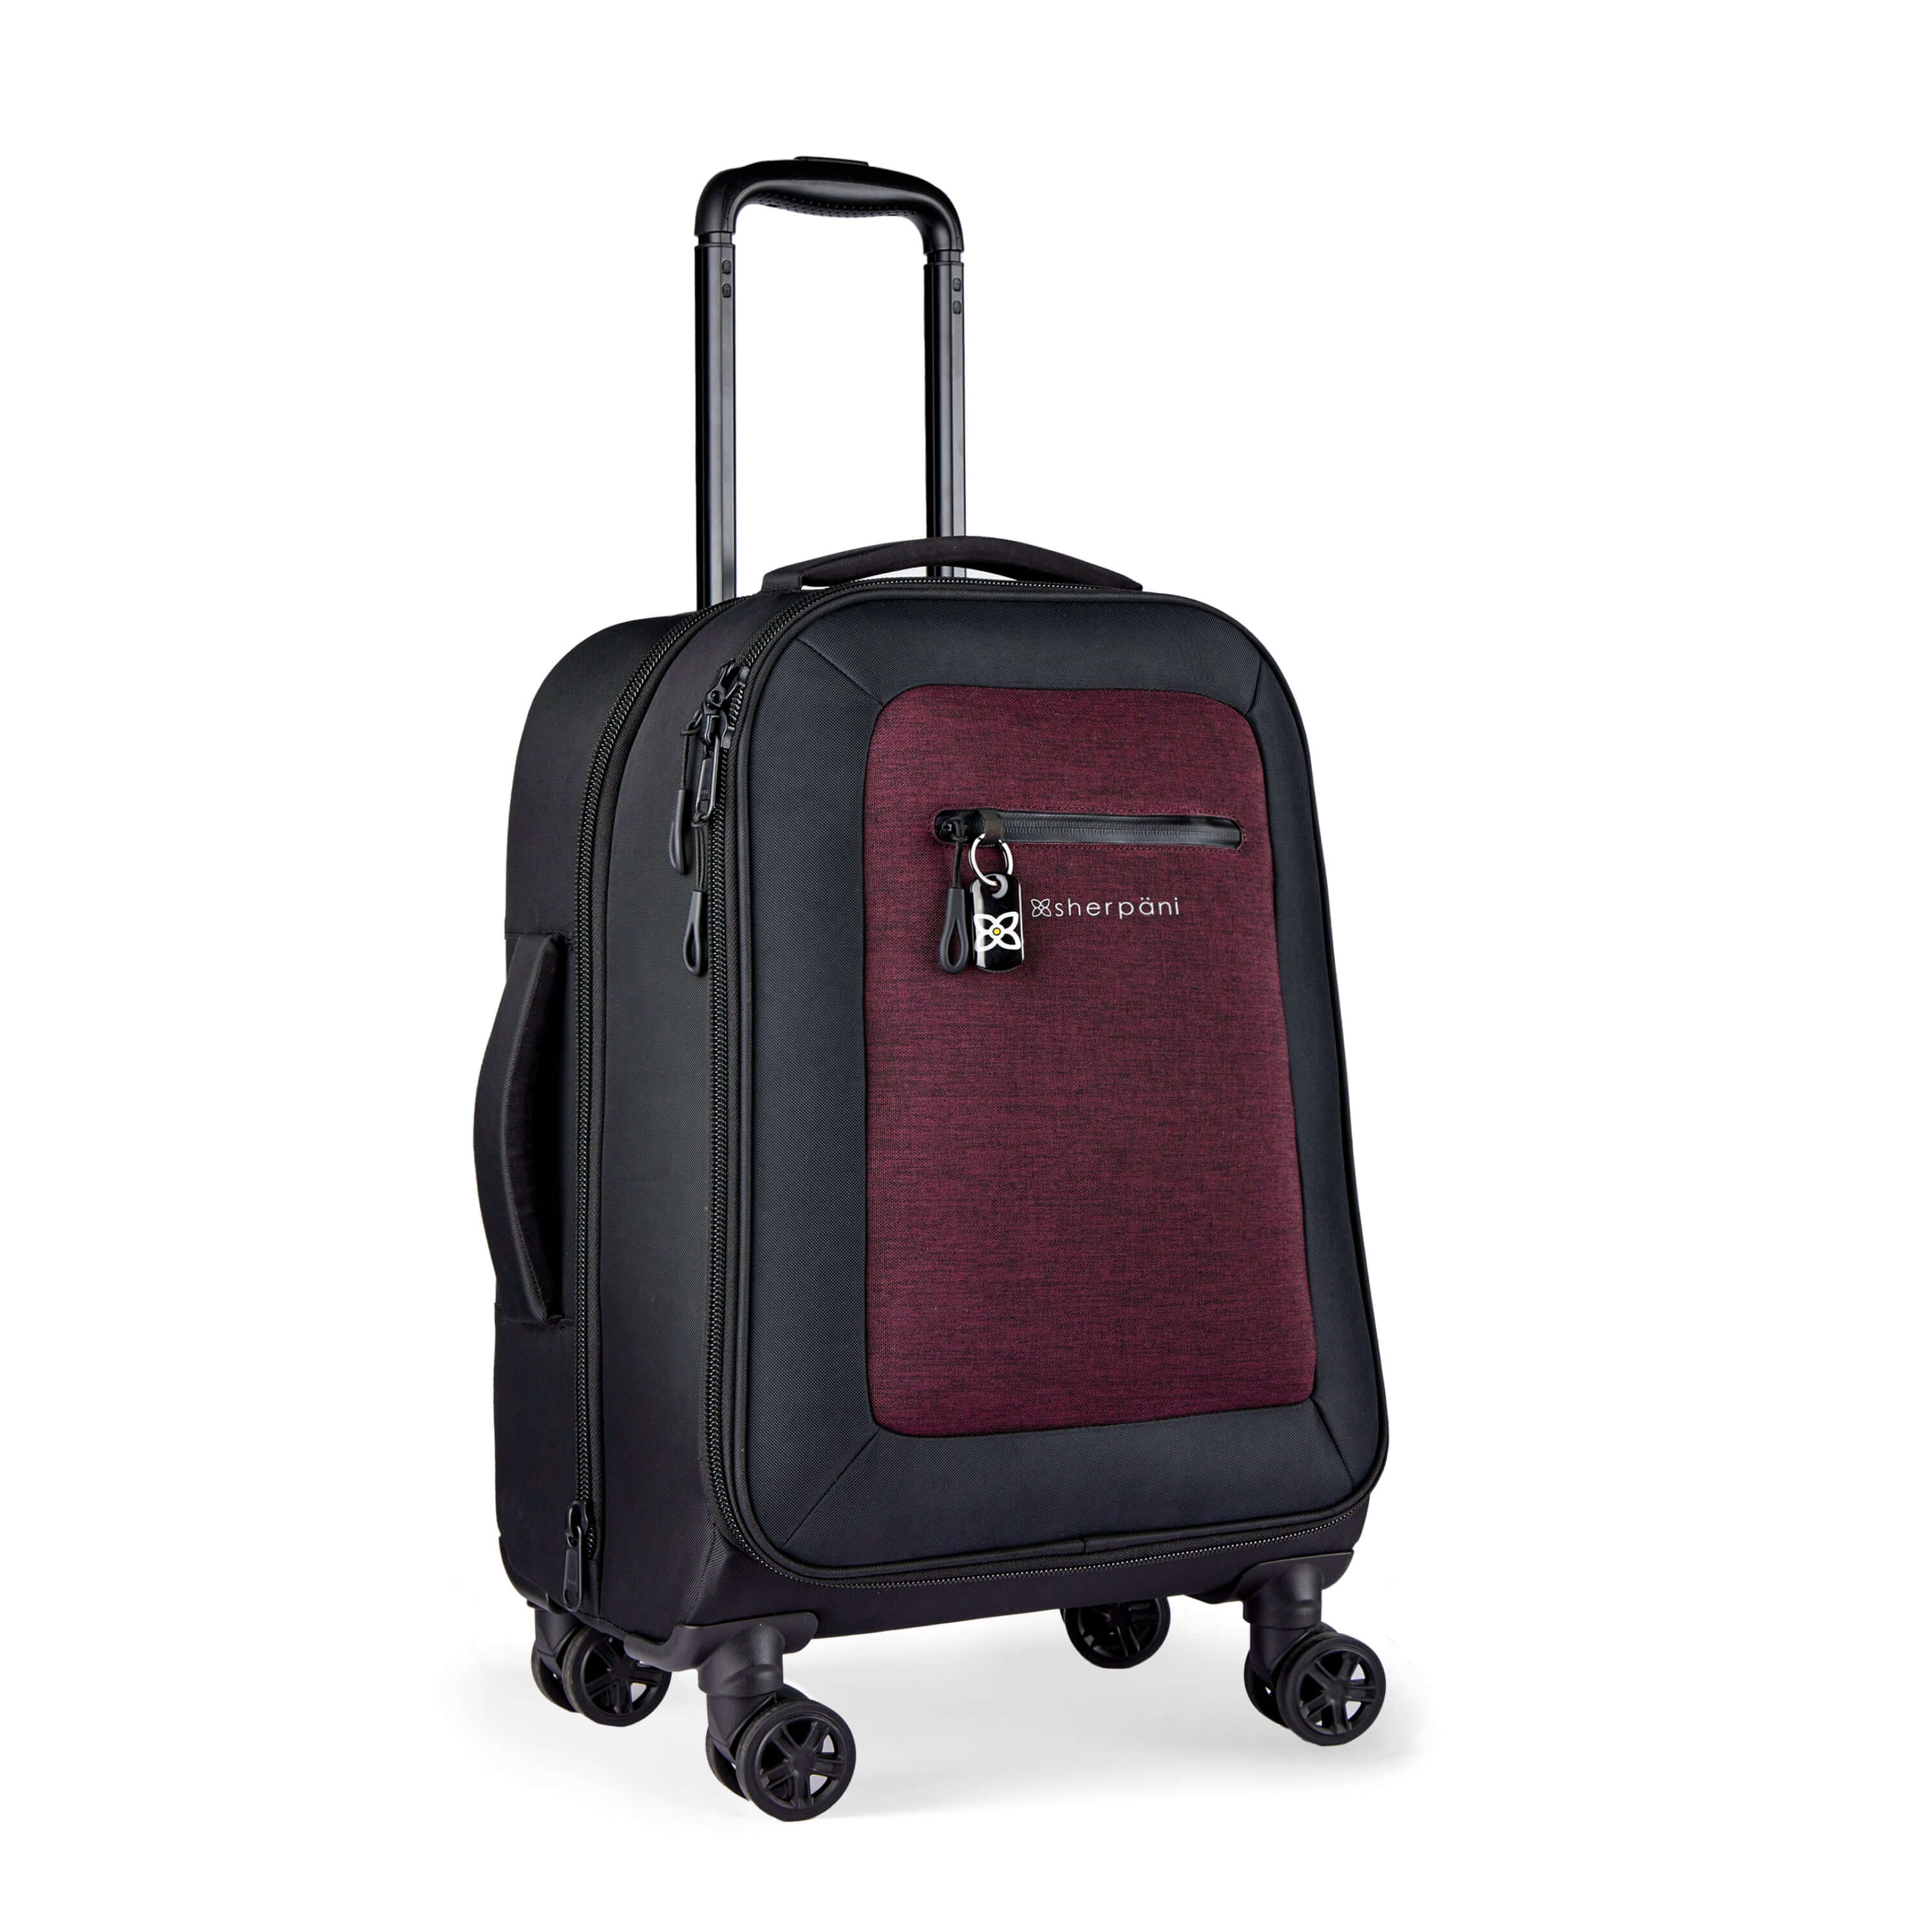 Angled front view of Sherpani's Anti-Theft luggage the Latitude in Merlot. The suitcase has a soft shell exterior made from recycled plastic bottles and features vegan leather accents in black. There is a main zipper compartment, an expansion zipper and an external pocket on the front with a locking zipper and a ReturnMe tag. On the top of the suitcase sits a retractable luggage handle. On the side sits an easy-access handle. At the bottom are four 360-degree spinner wheels for smooth rolling. 